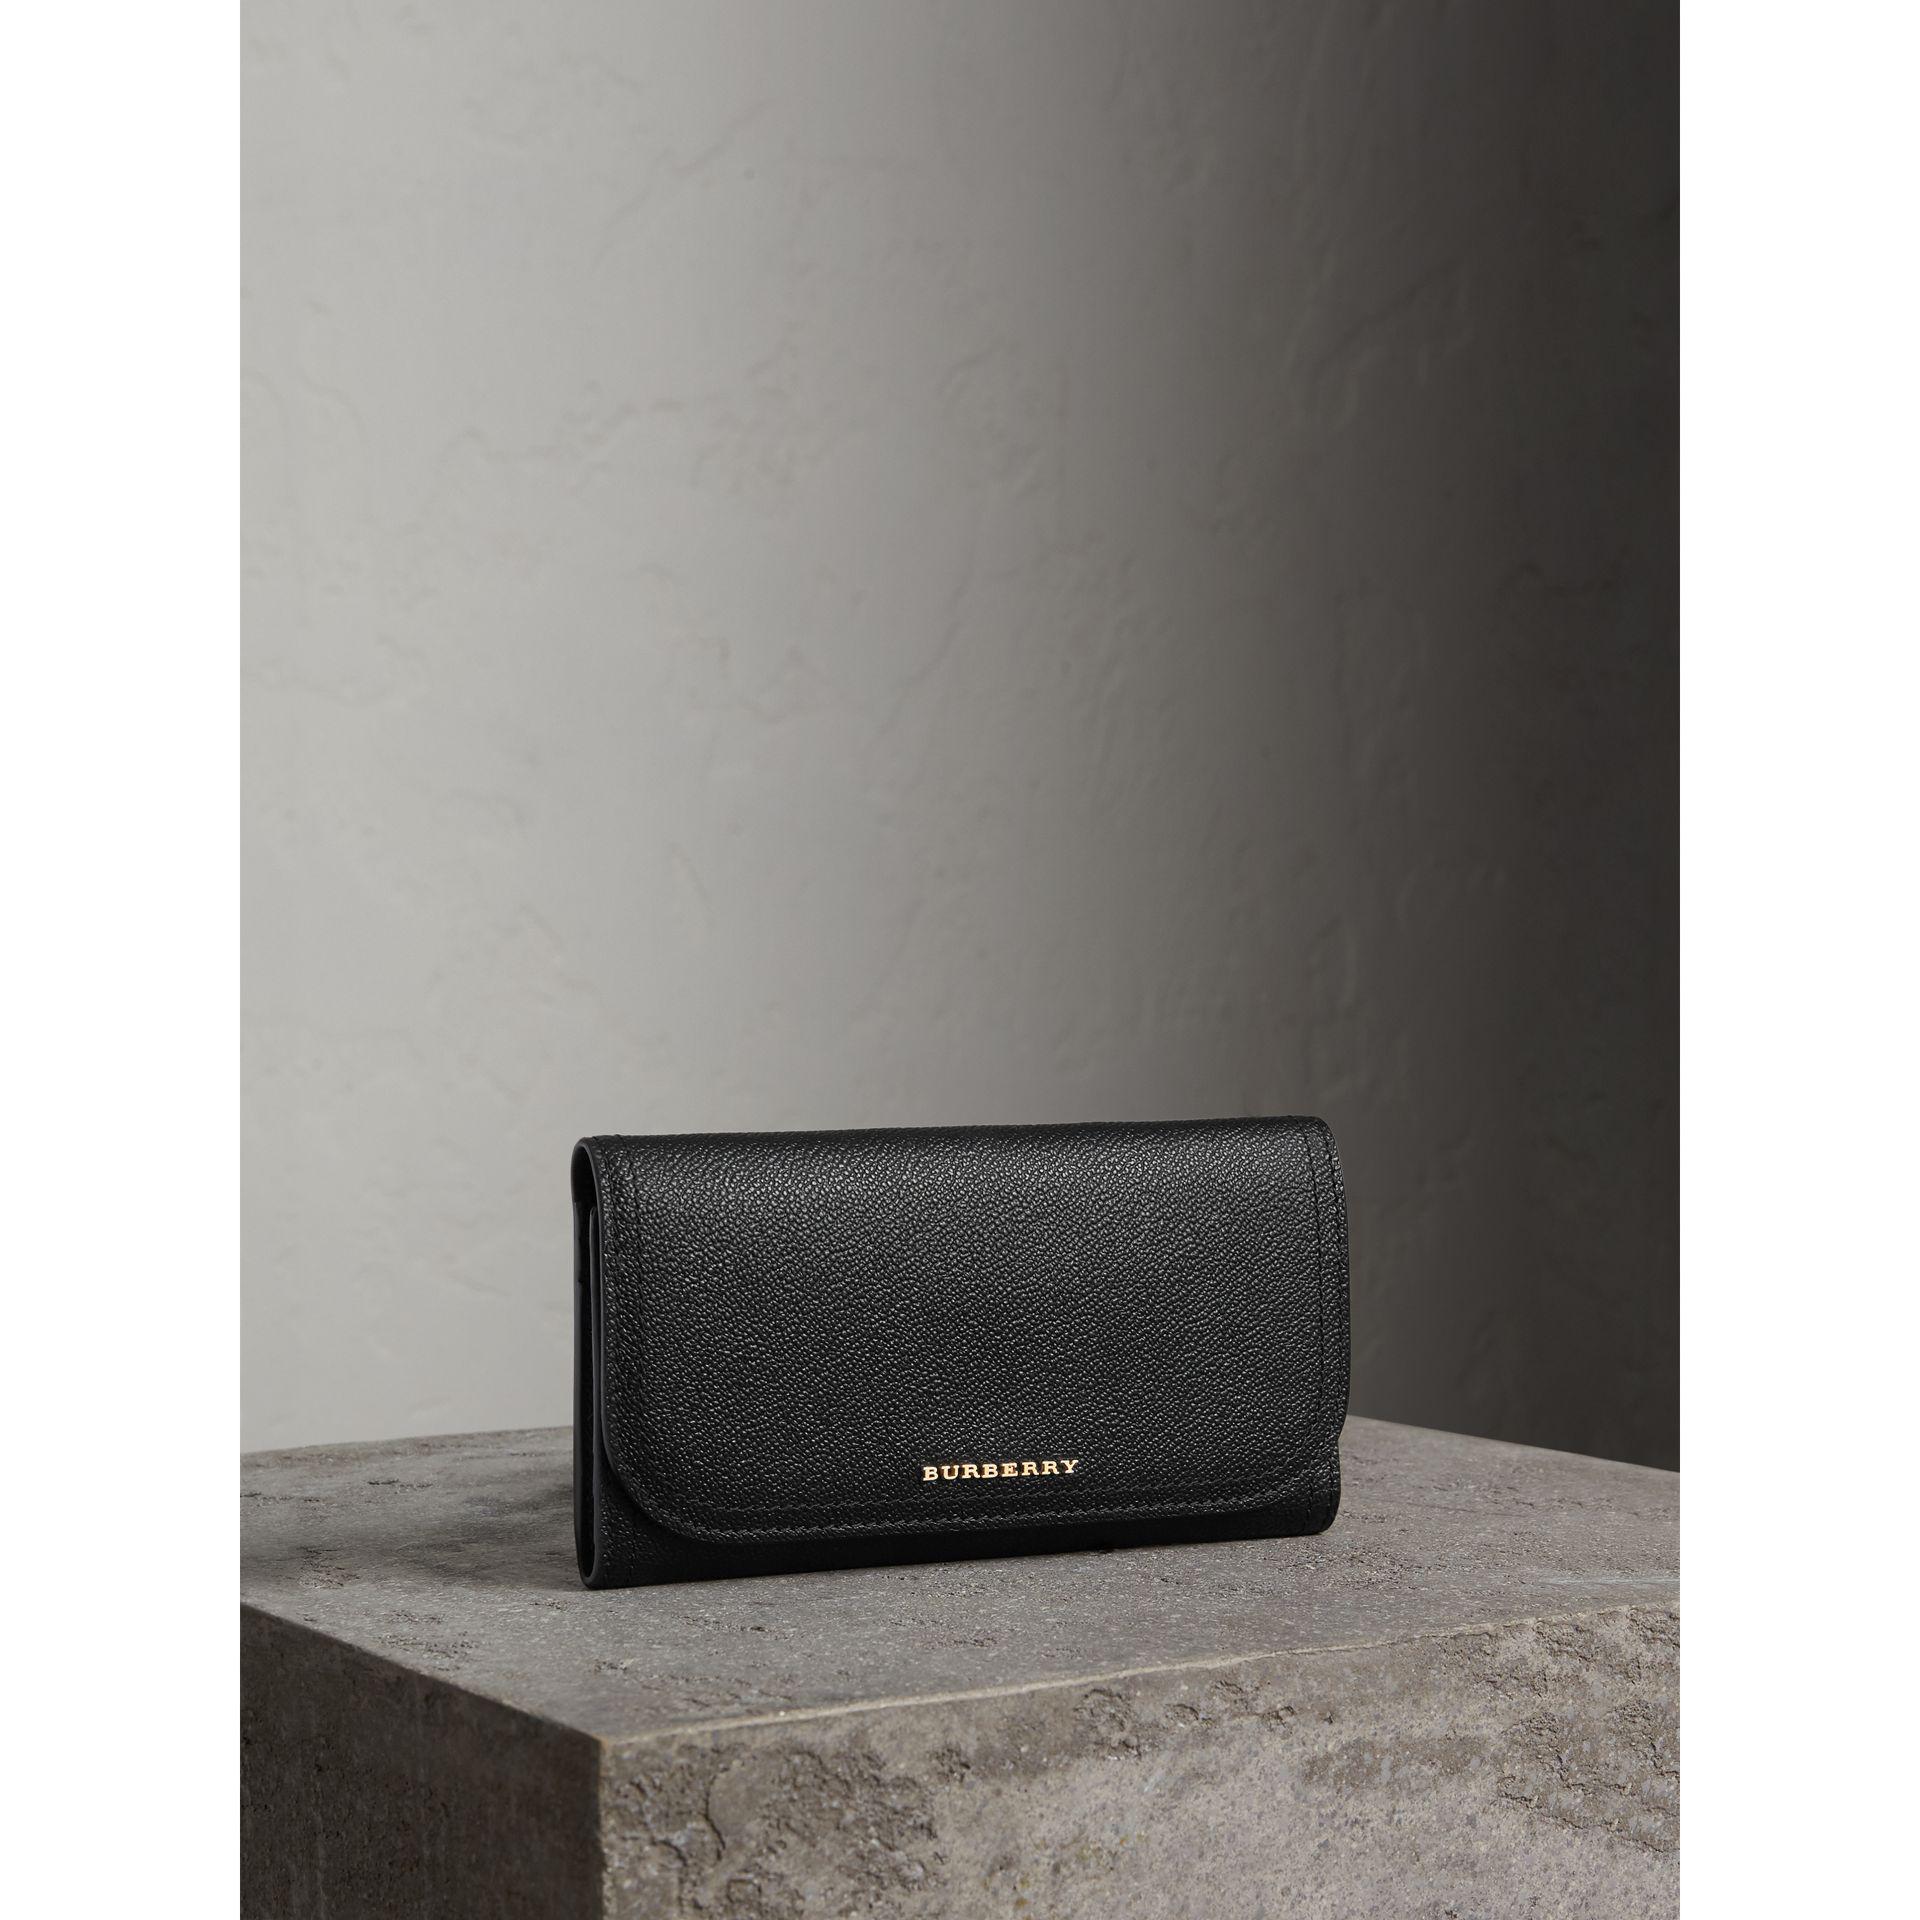 Burberry Leather Continental Wallet With Removable Coin Case Black